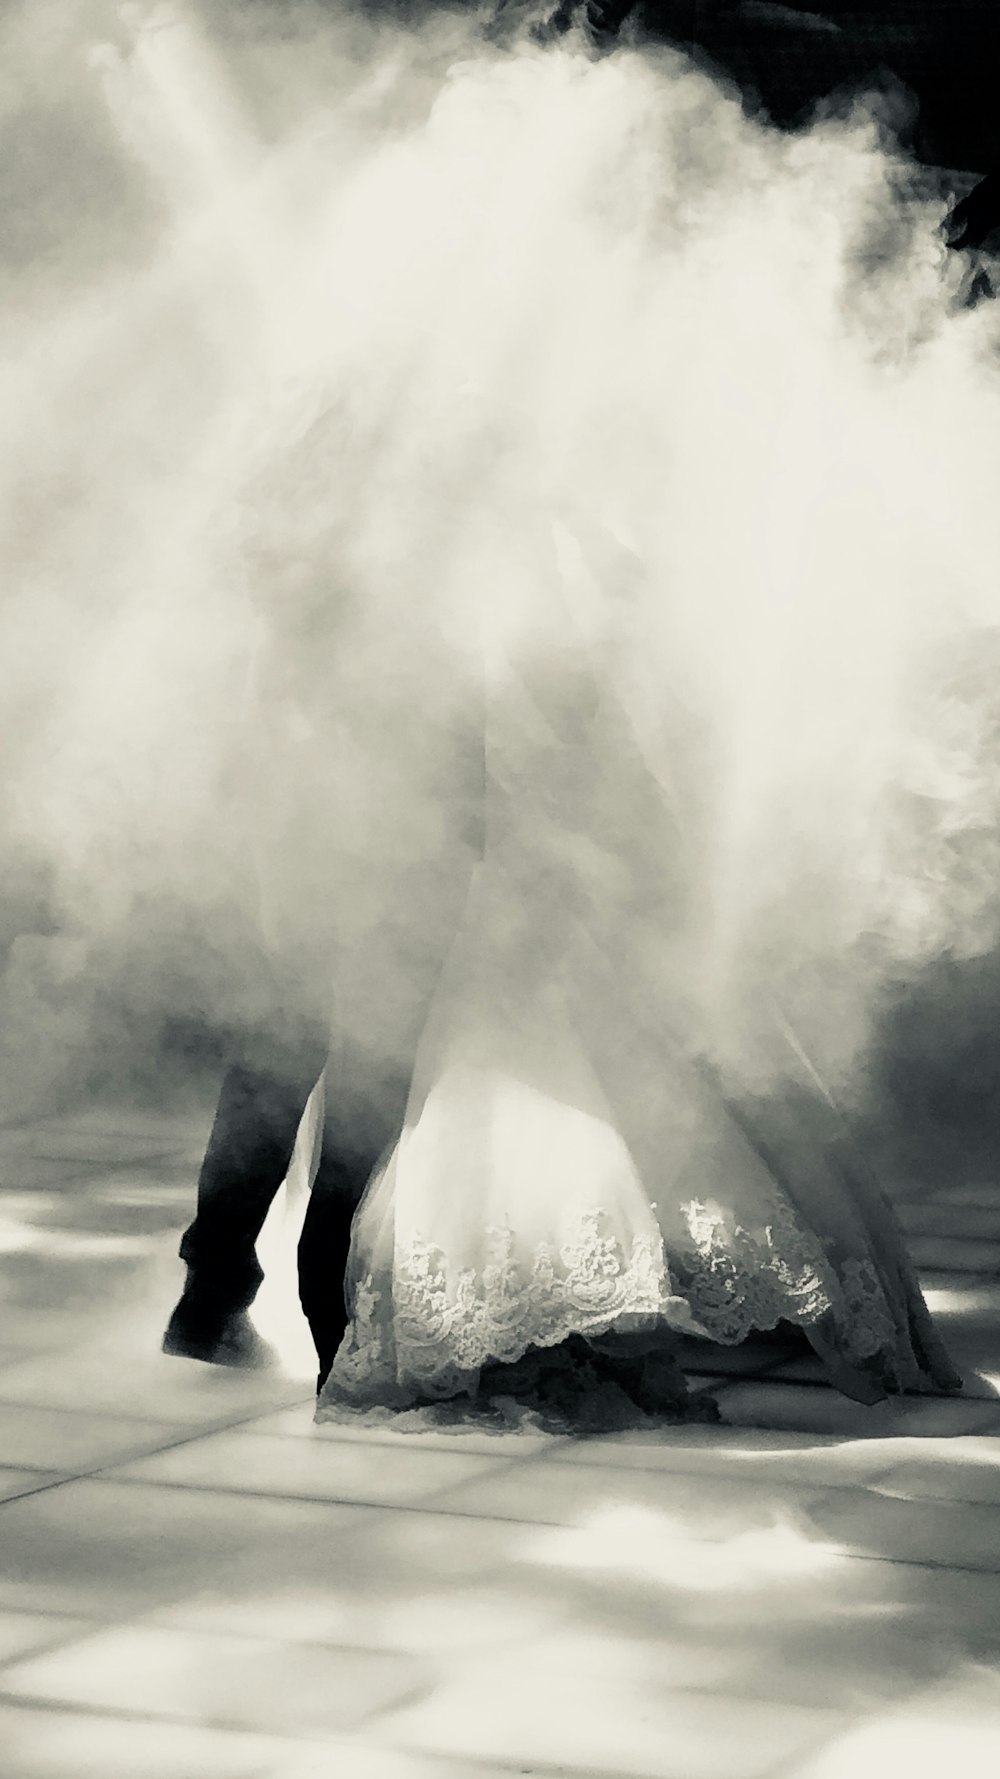 a woman in a wedding dress is covered in smoke